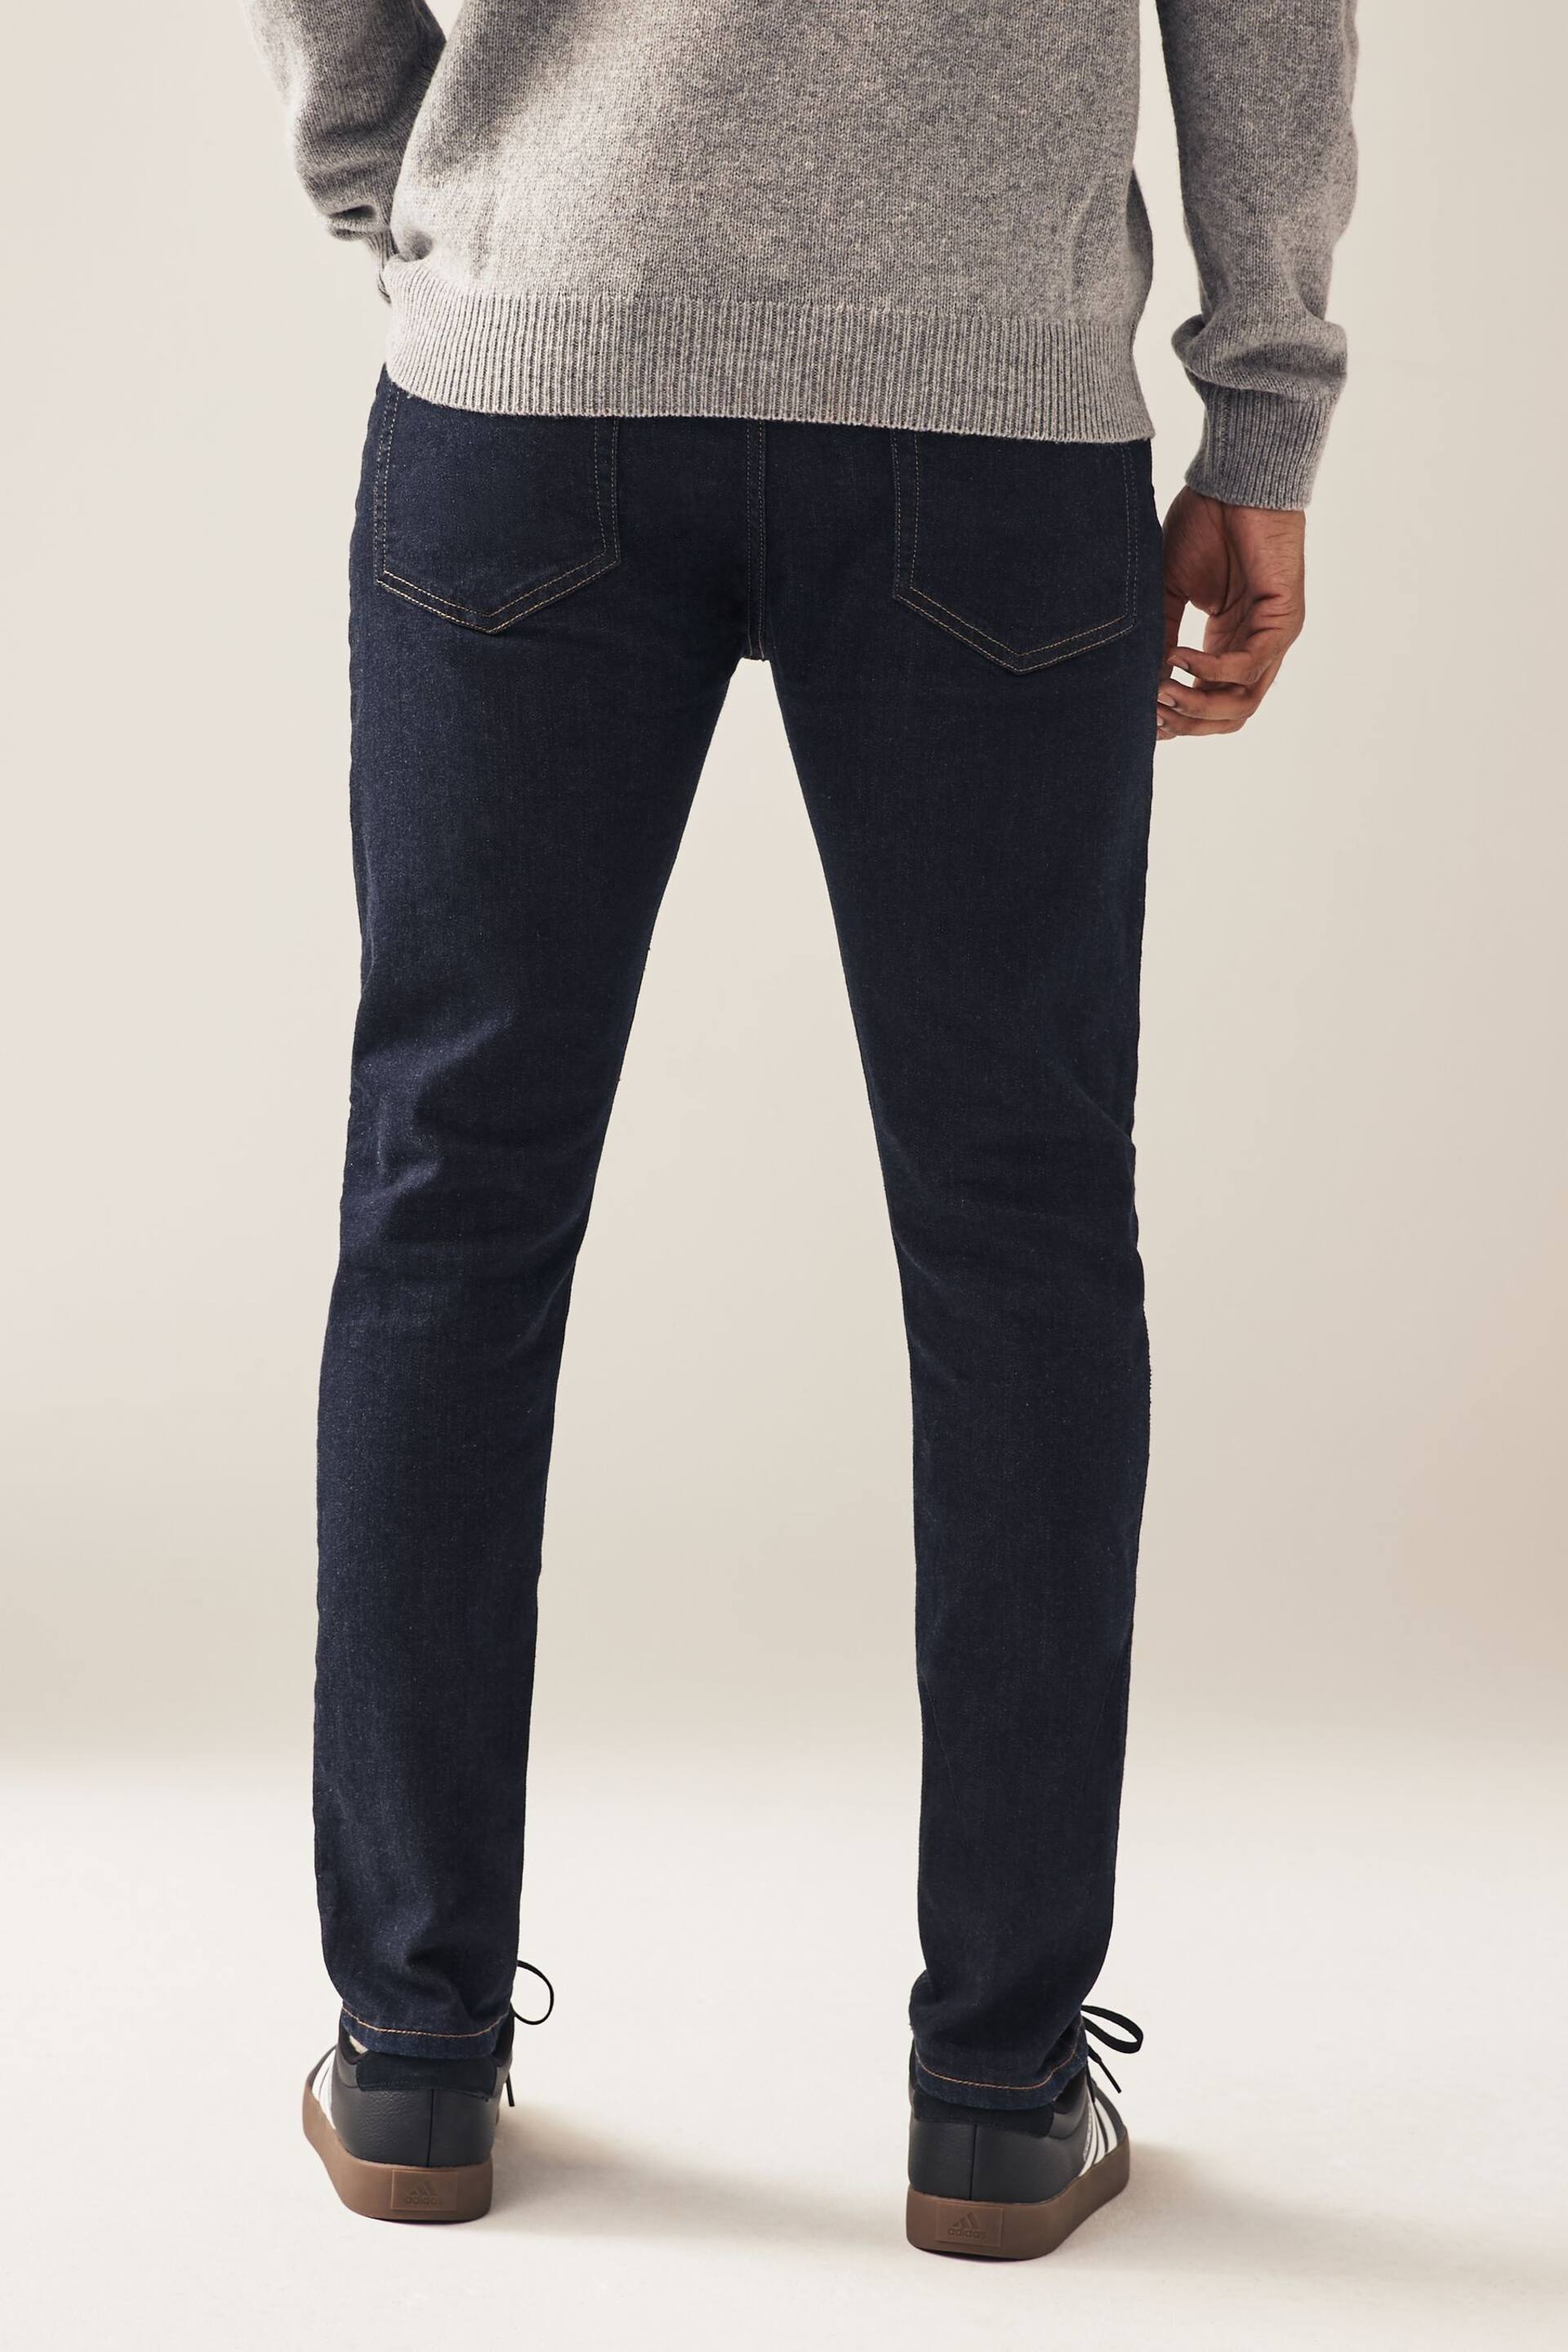 Blue Indigo Rinse Skinny Fit Classic Stretch Jeans - Image 4 of 9